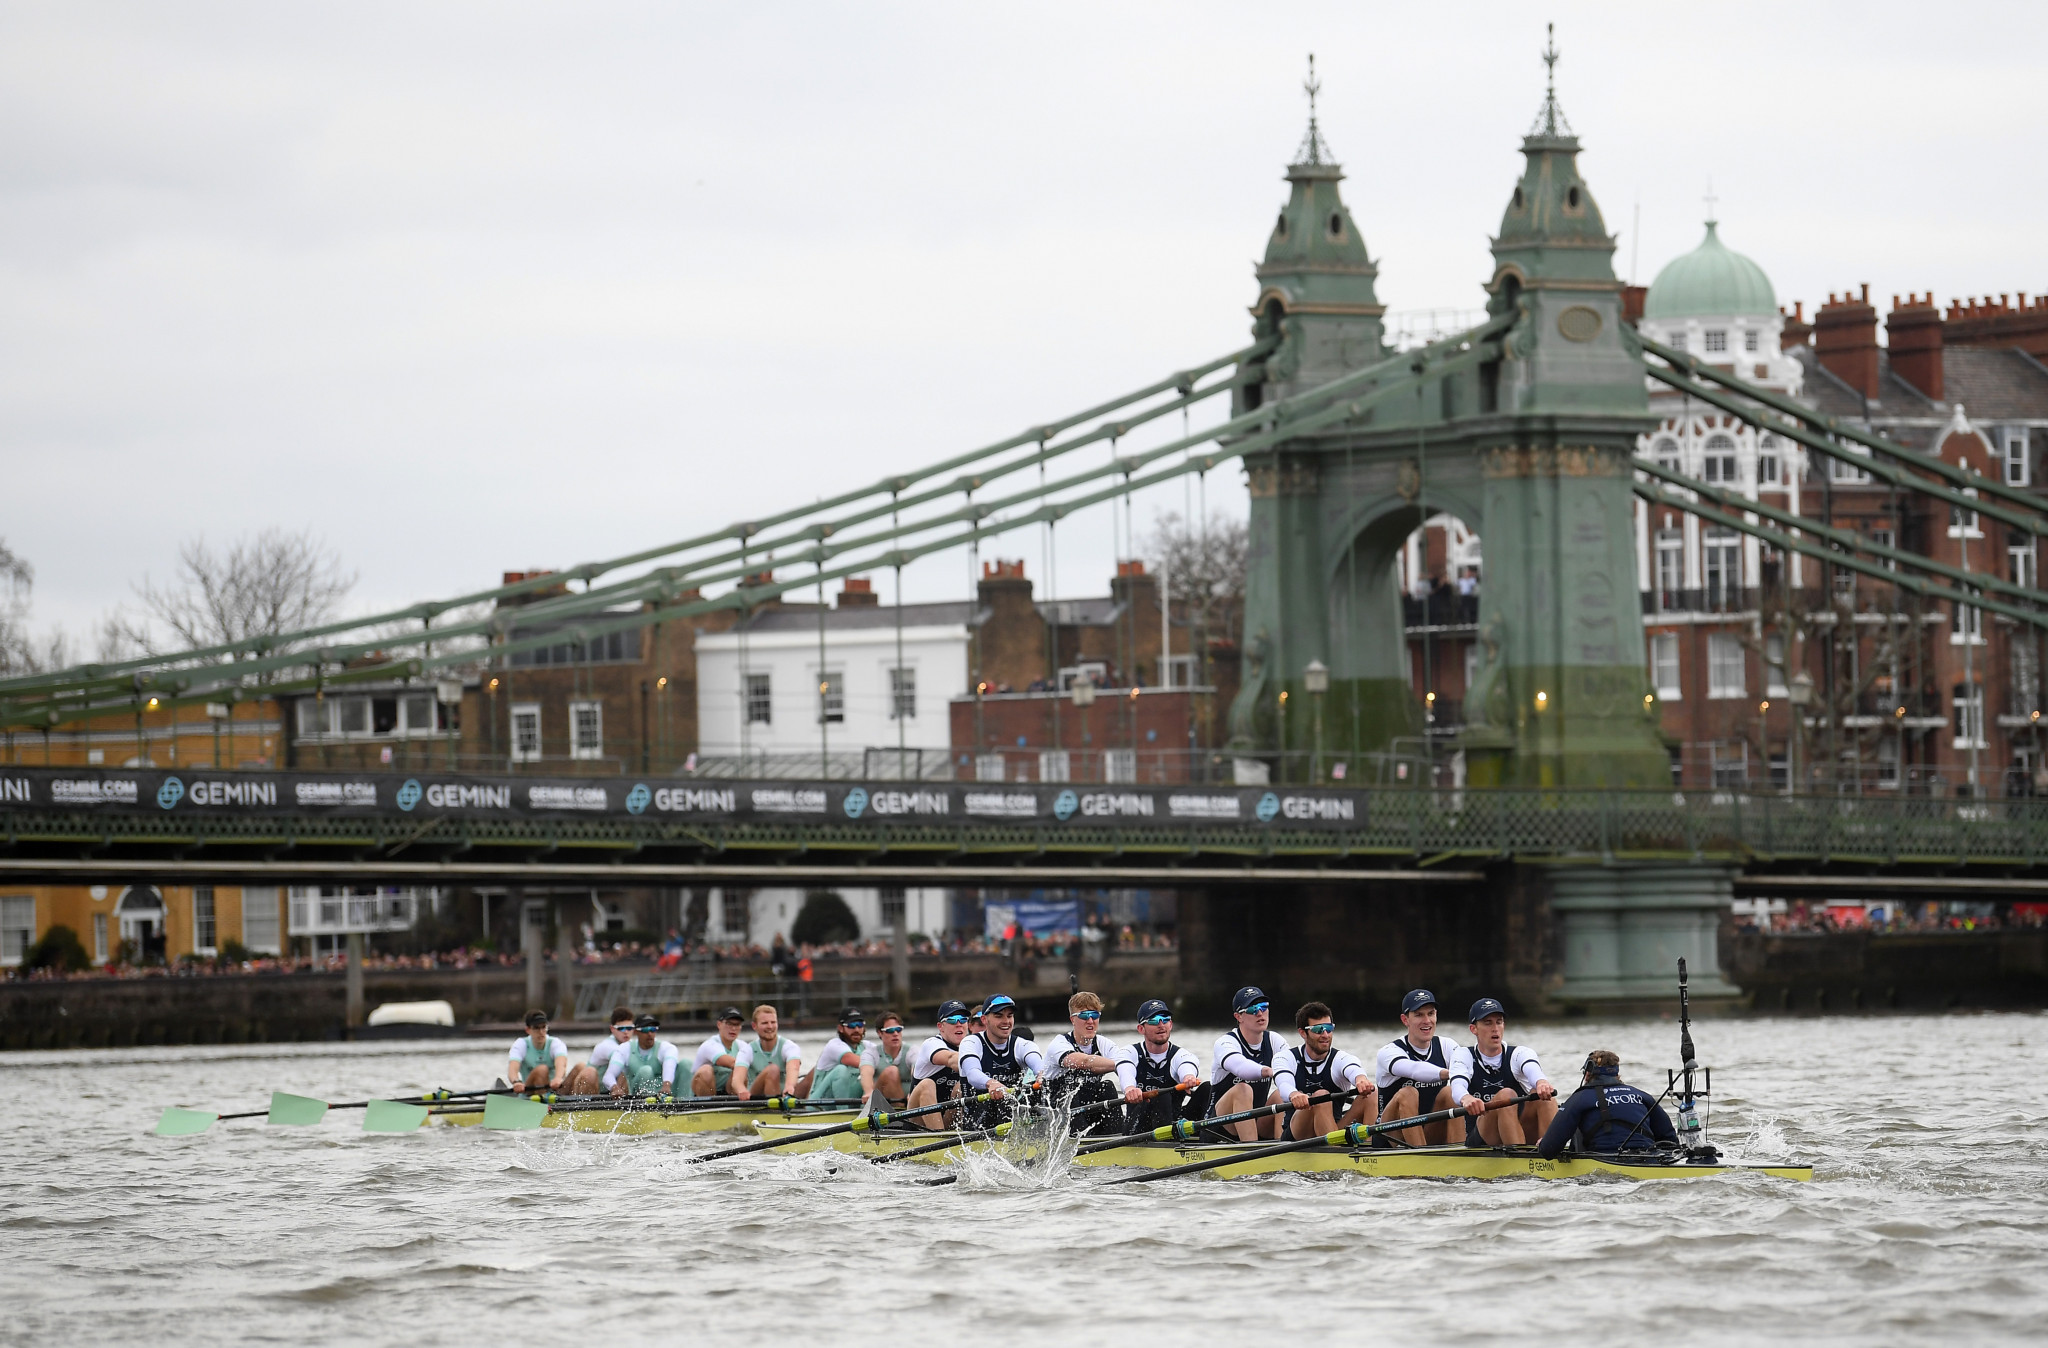 Cambridge complete clean sweep over Oxford at Boat Race